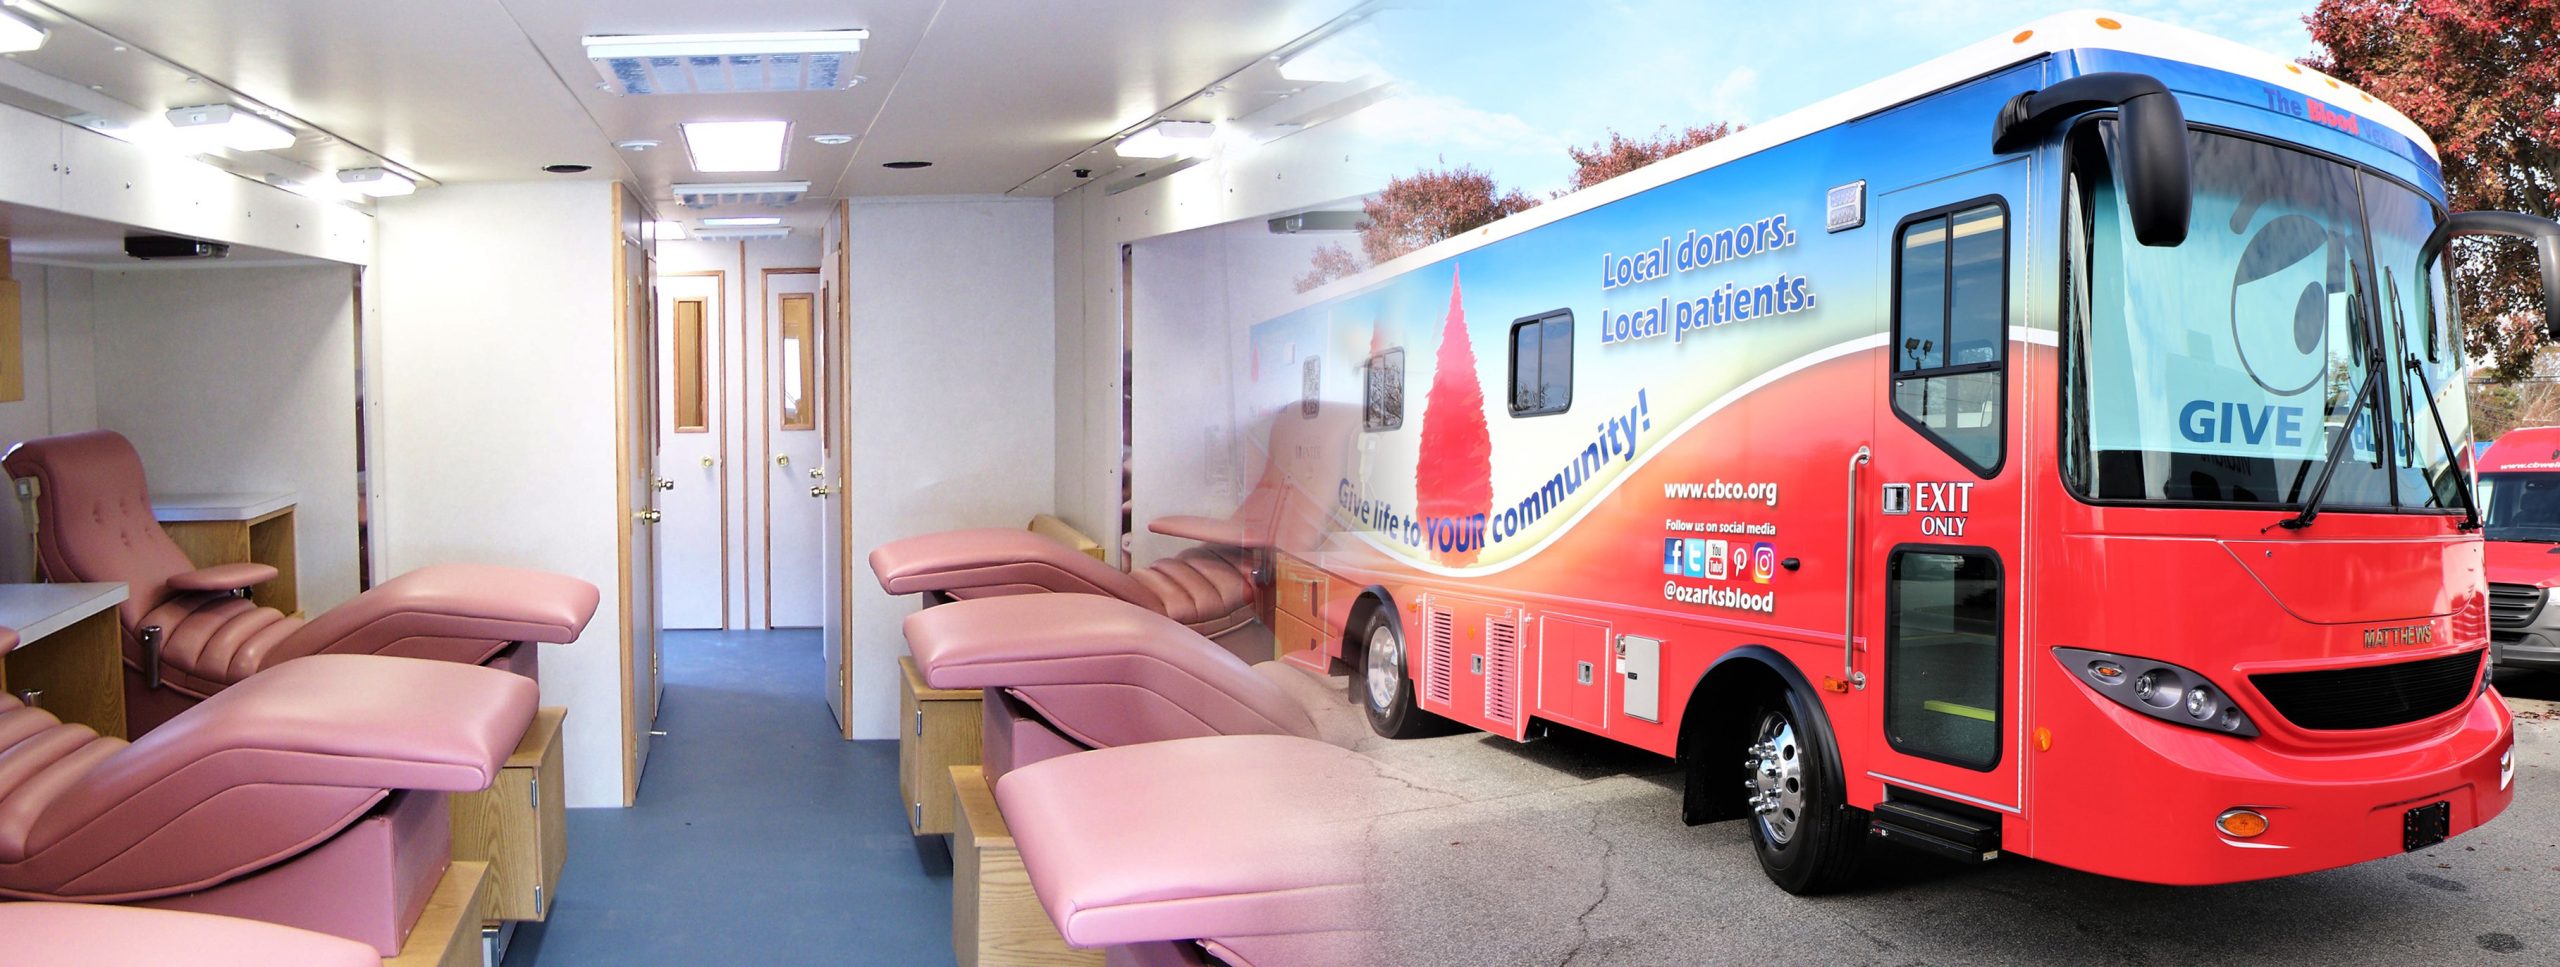 Medical Care Vehicles